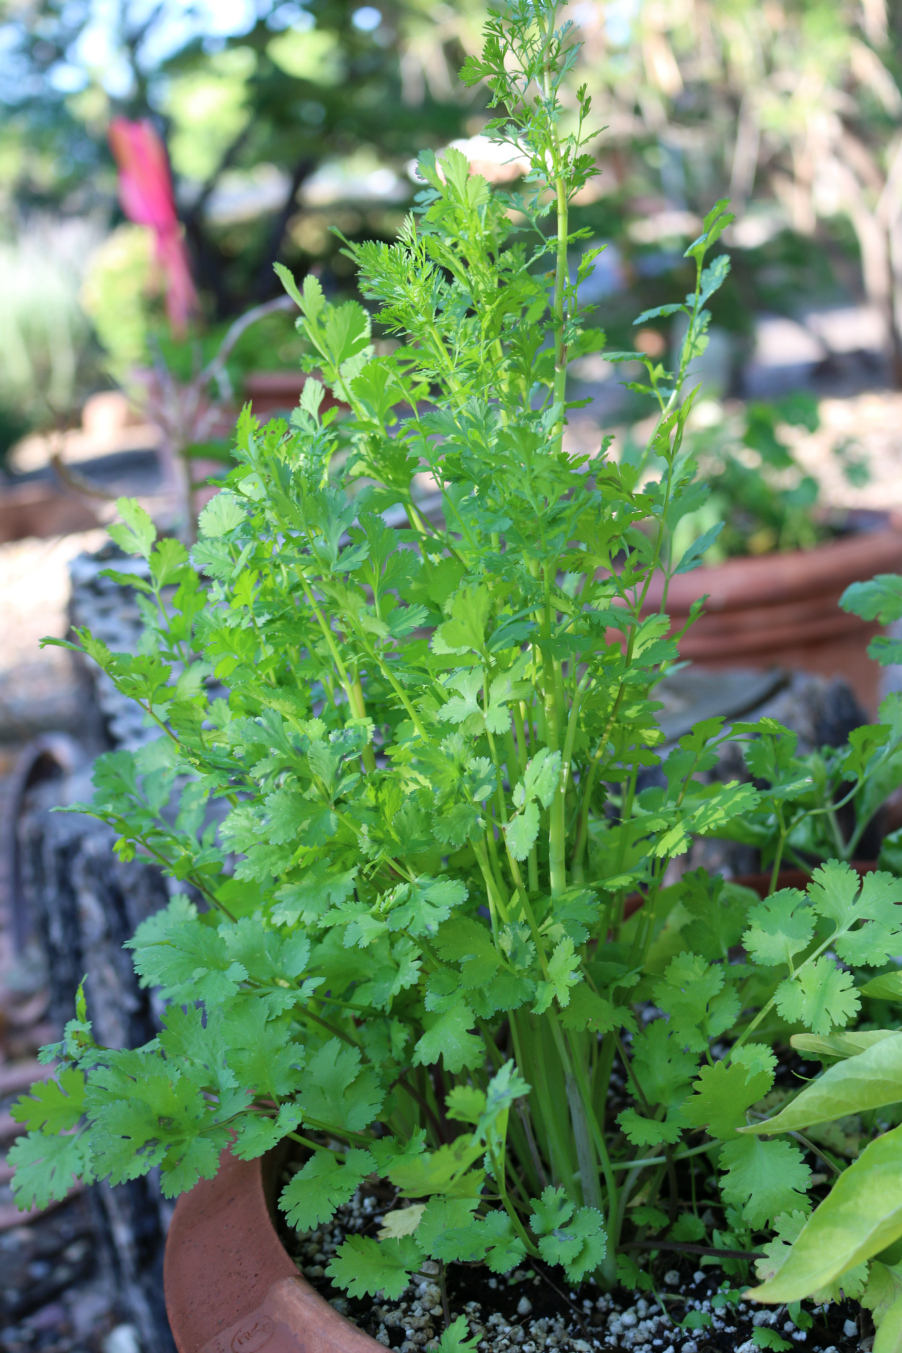 A Cilantro Herb reseeded from last year's crop